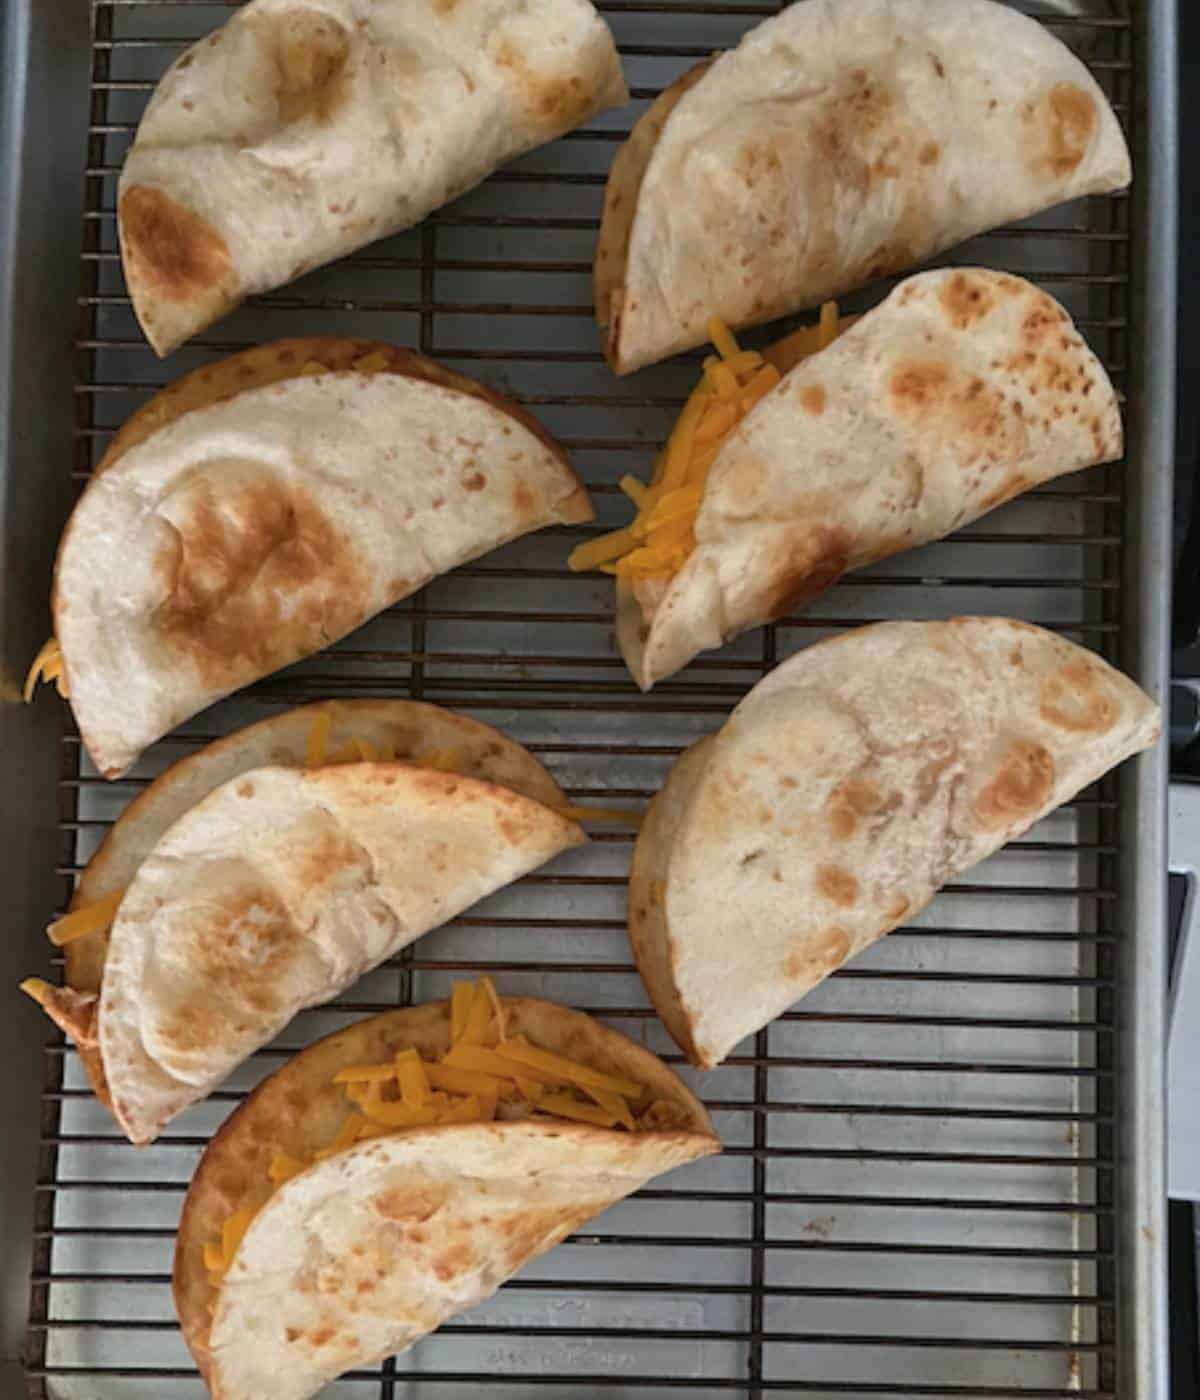 tacos on cookie sheet with rack ready to bake